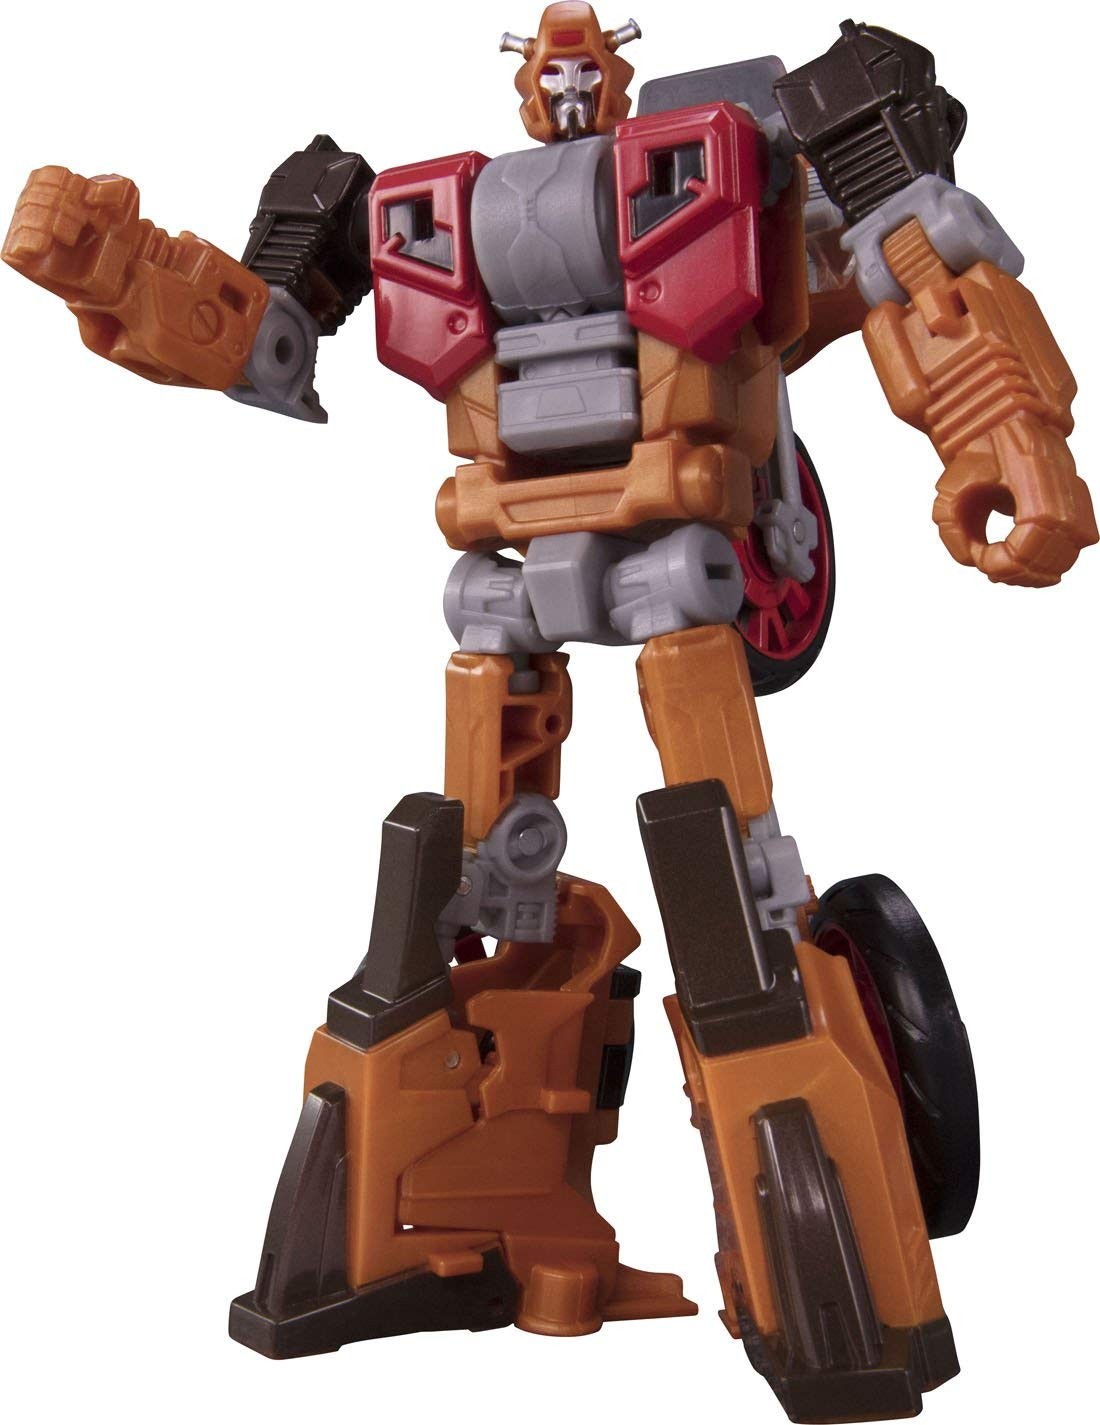 Transformers News: Amazon Japan Listings for Takara Power of the Primes Wreck Gar and Nemesis Prime Featuring New Image